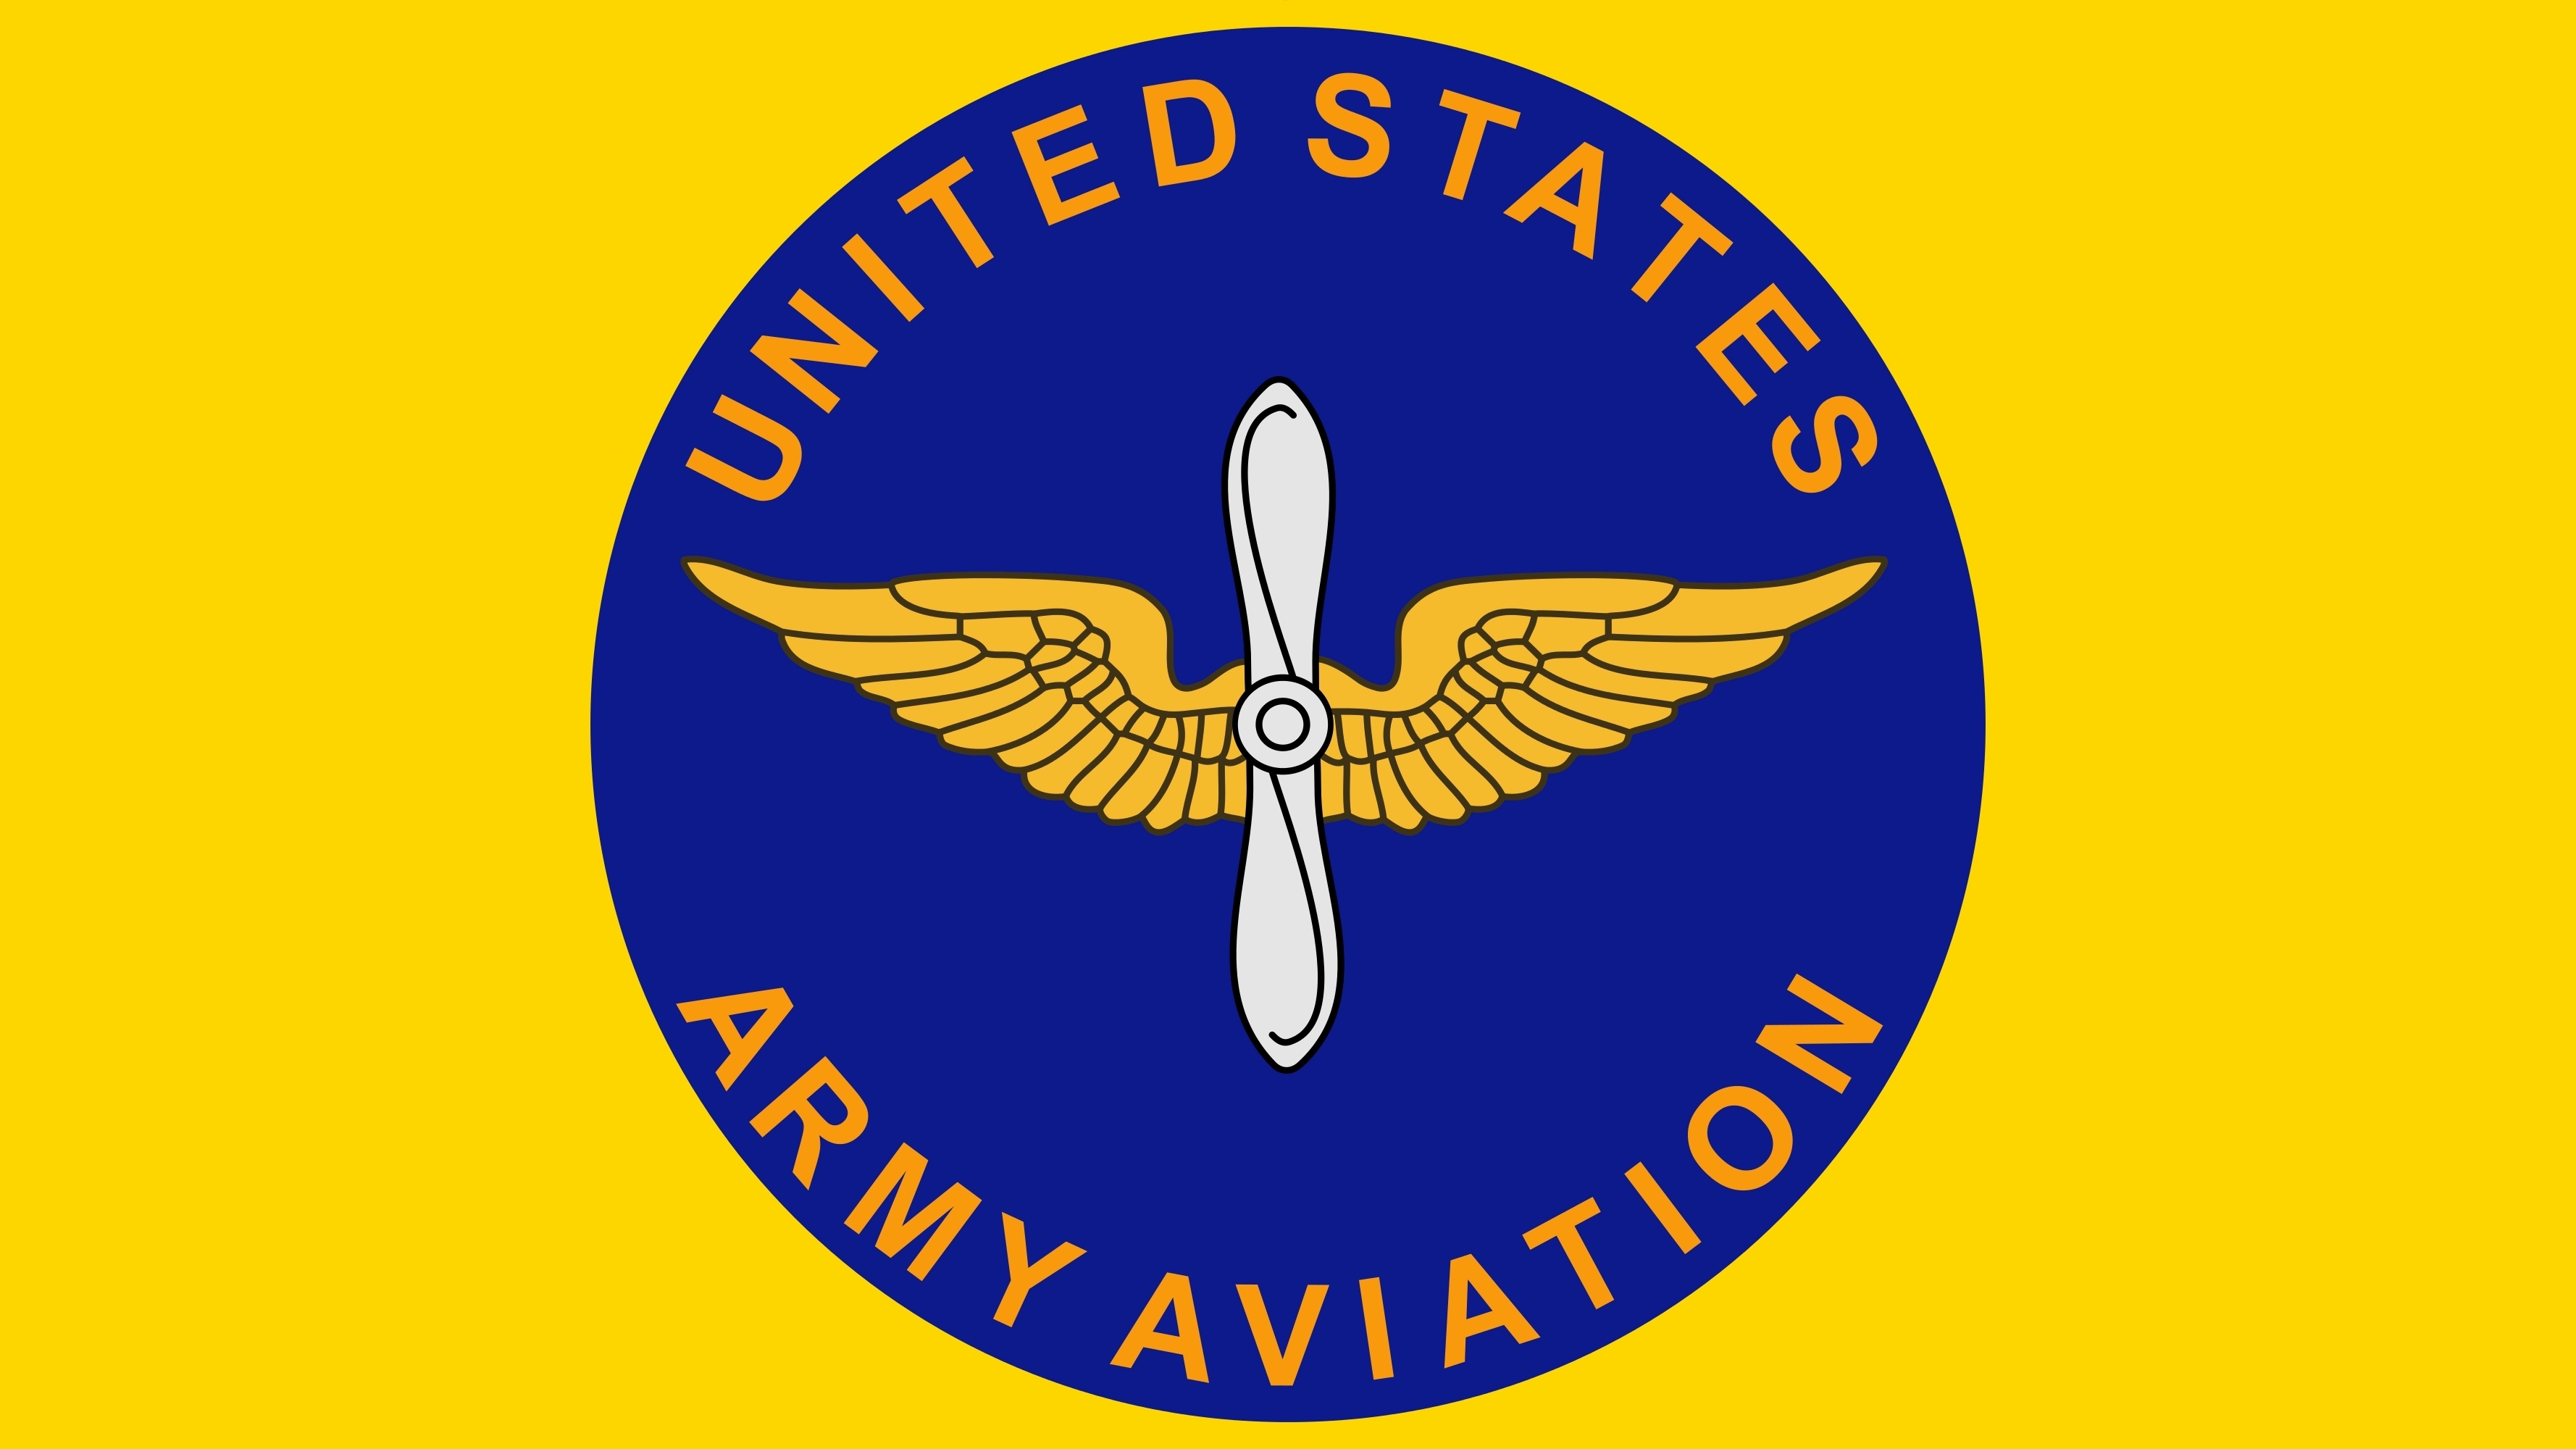 Free HD military, united states army